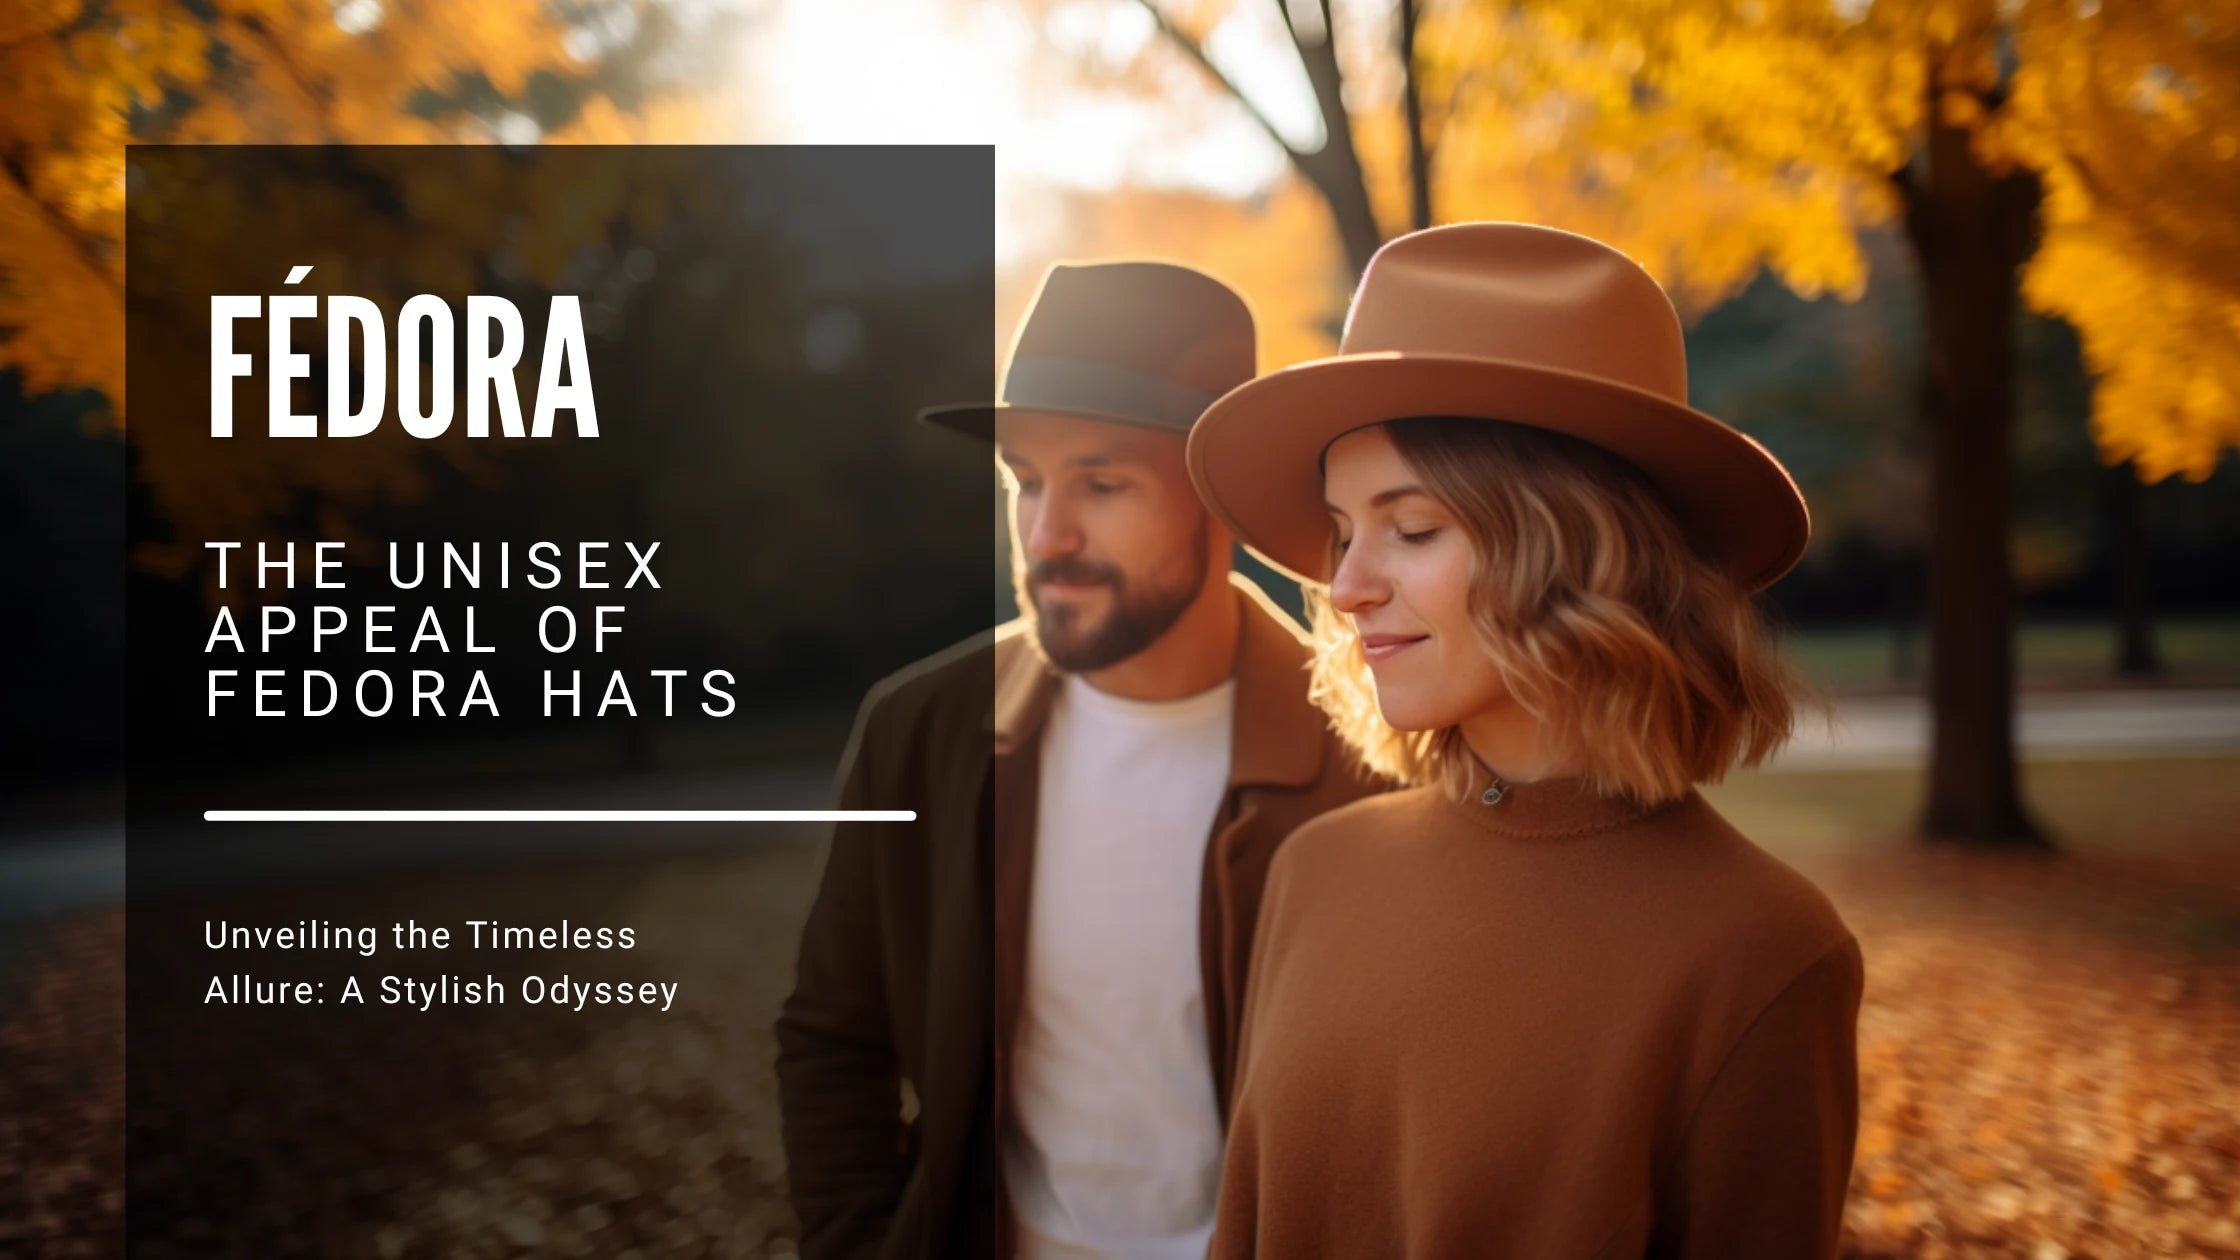 Amidst a rustic autumn park, a man and woman don soft felt fedoras with low crowns and 2-inch brims. The scene is bathed in the gentle glow of golden hour light, with vibrant fall leaves creating a colorful backdrop.